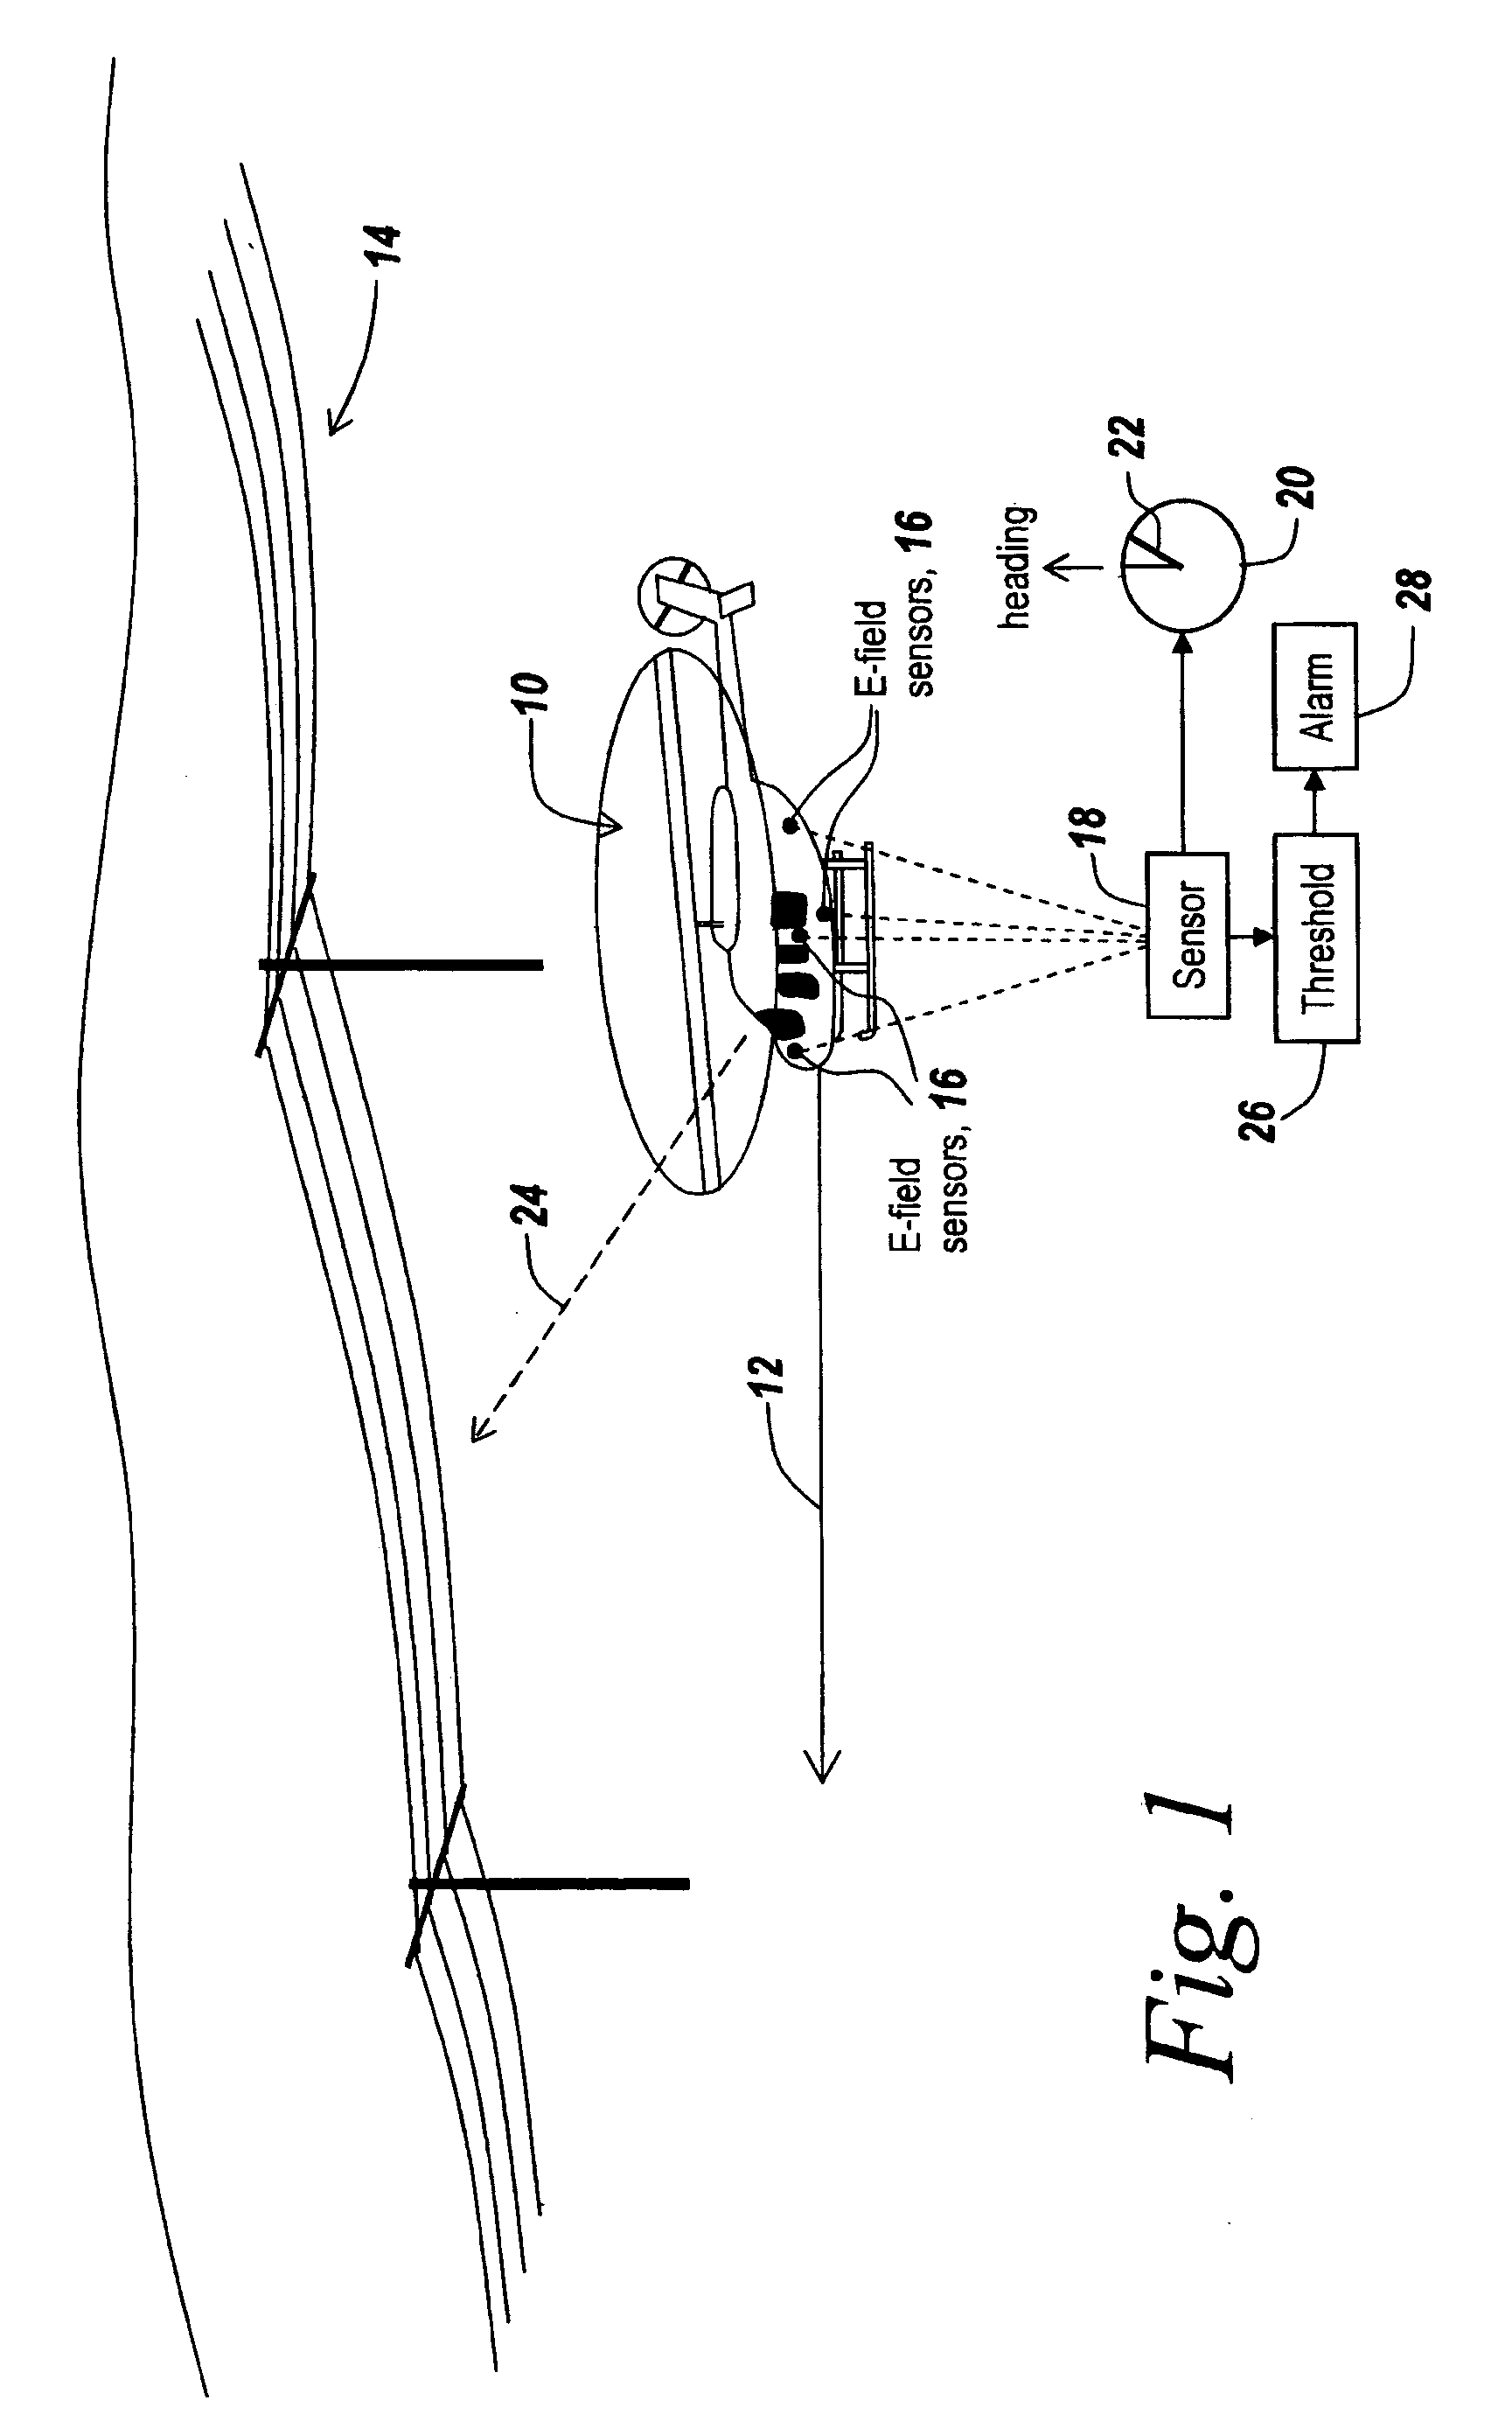 Method and apparatus for avoidance of power lines or trip wires by fixed and rotary winged aircraft